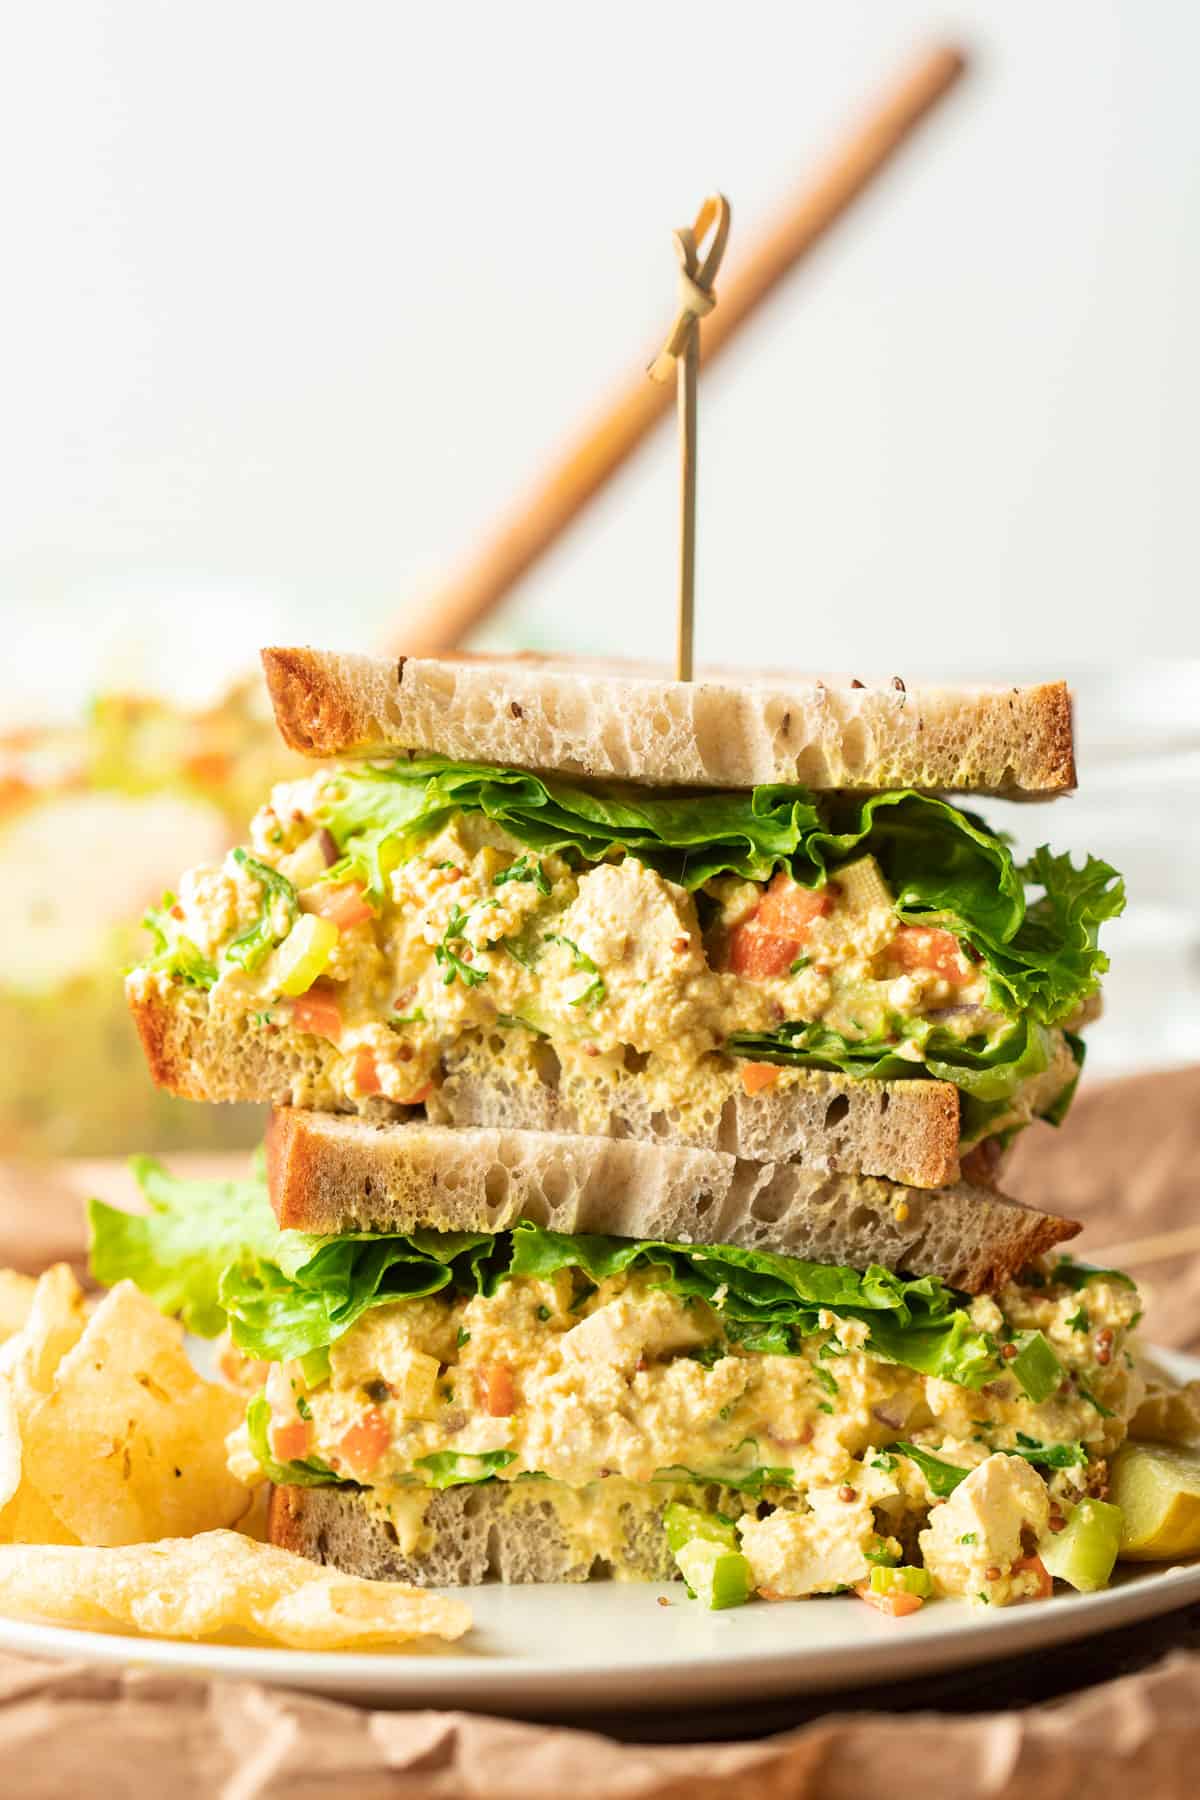 Two halves of a vegan egg salad sandwich are stacked on a plate.